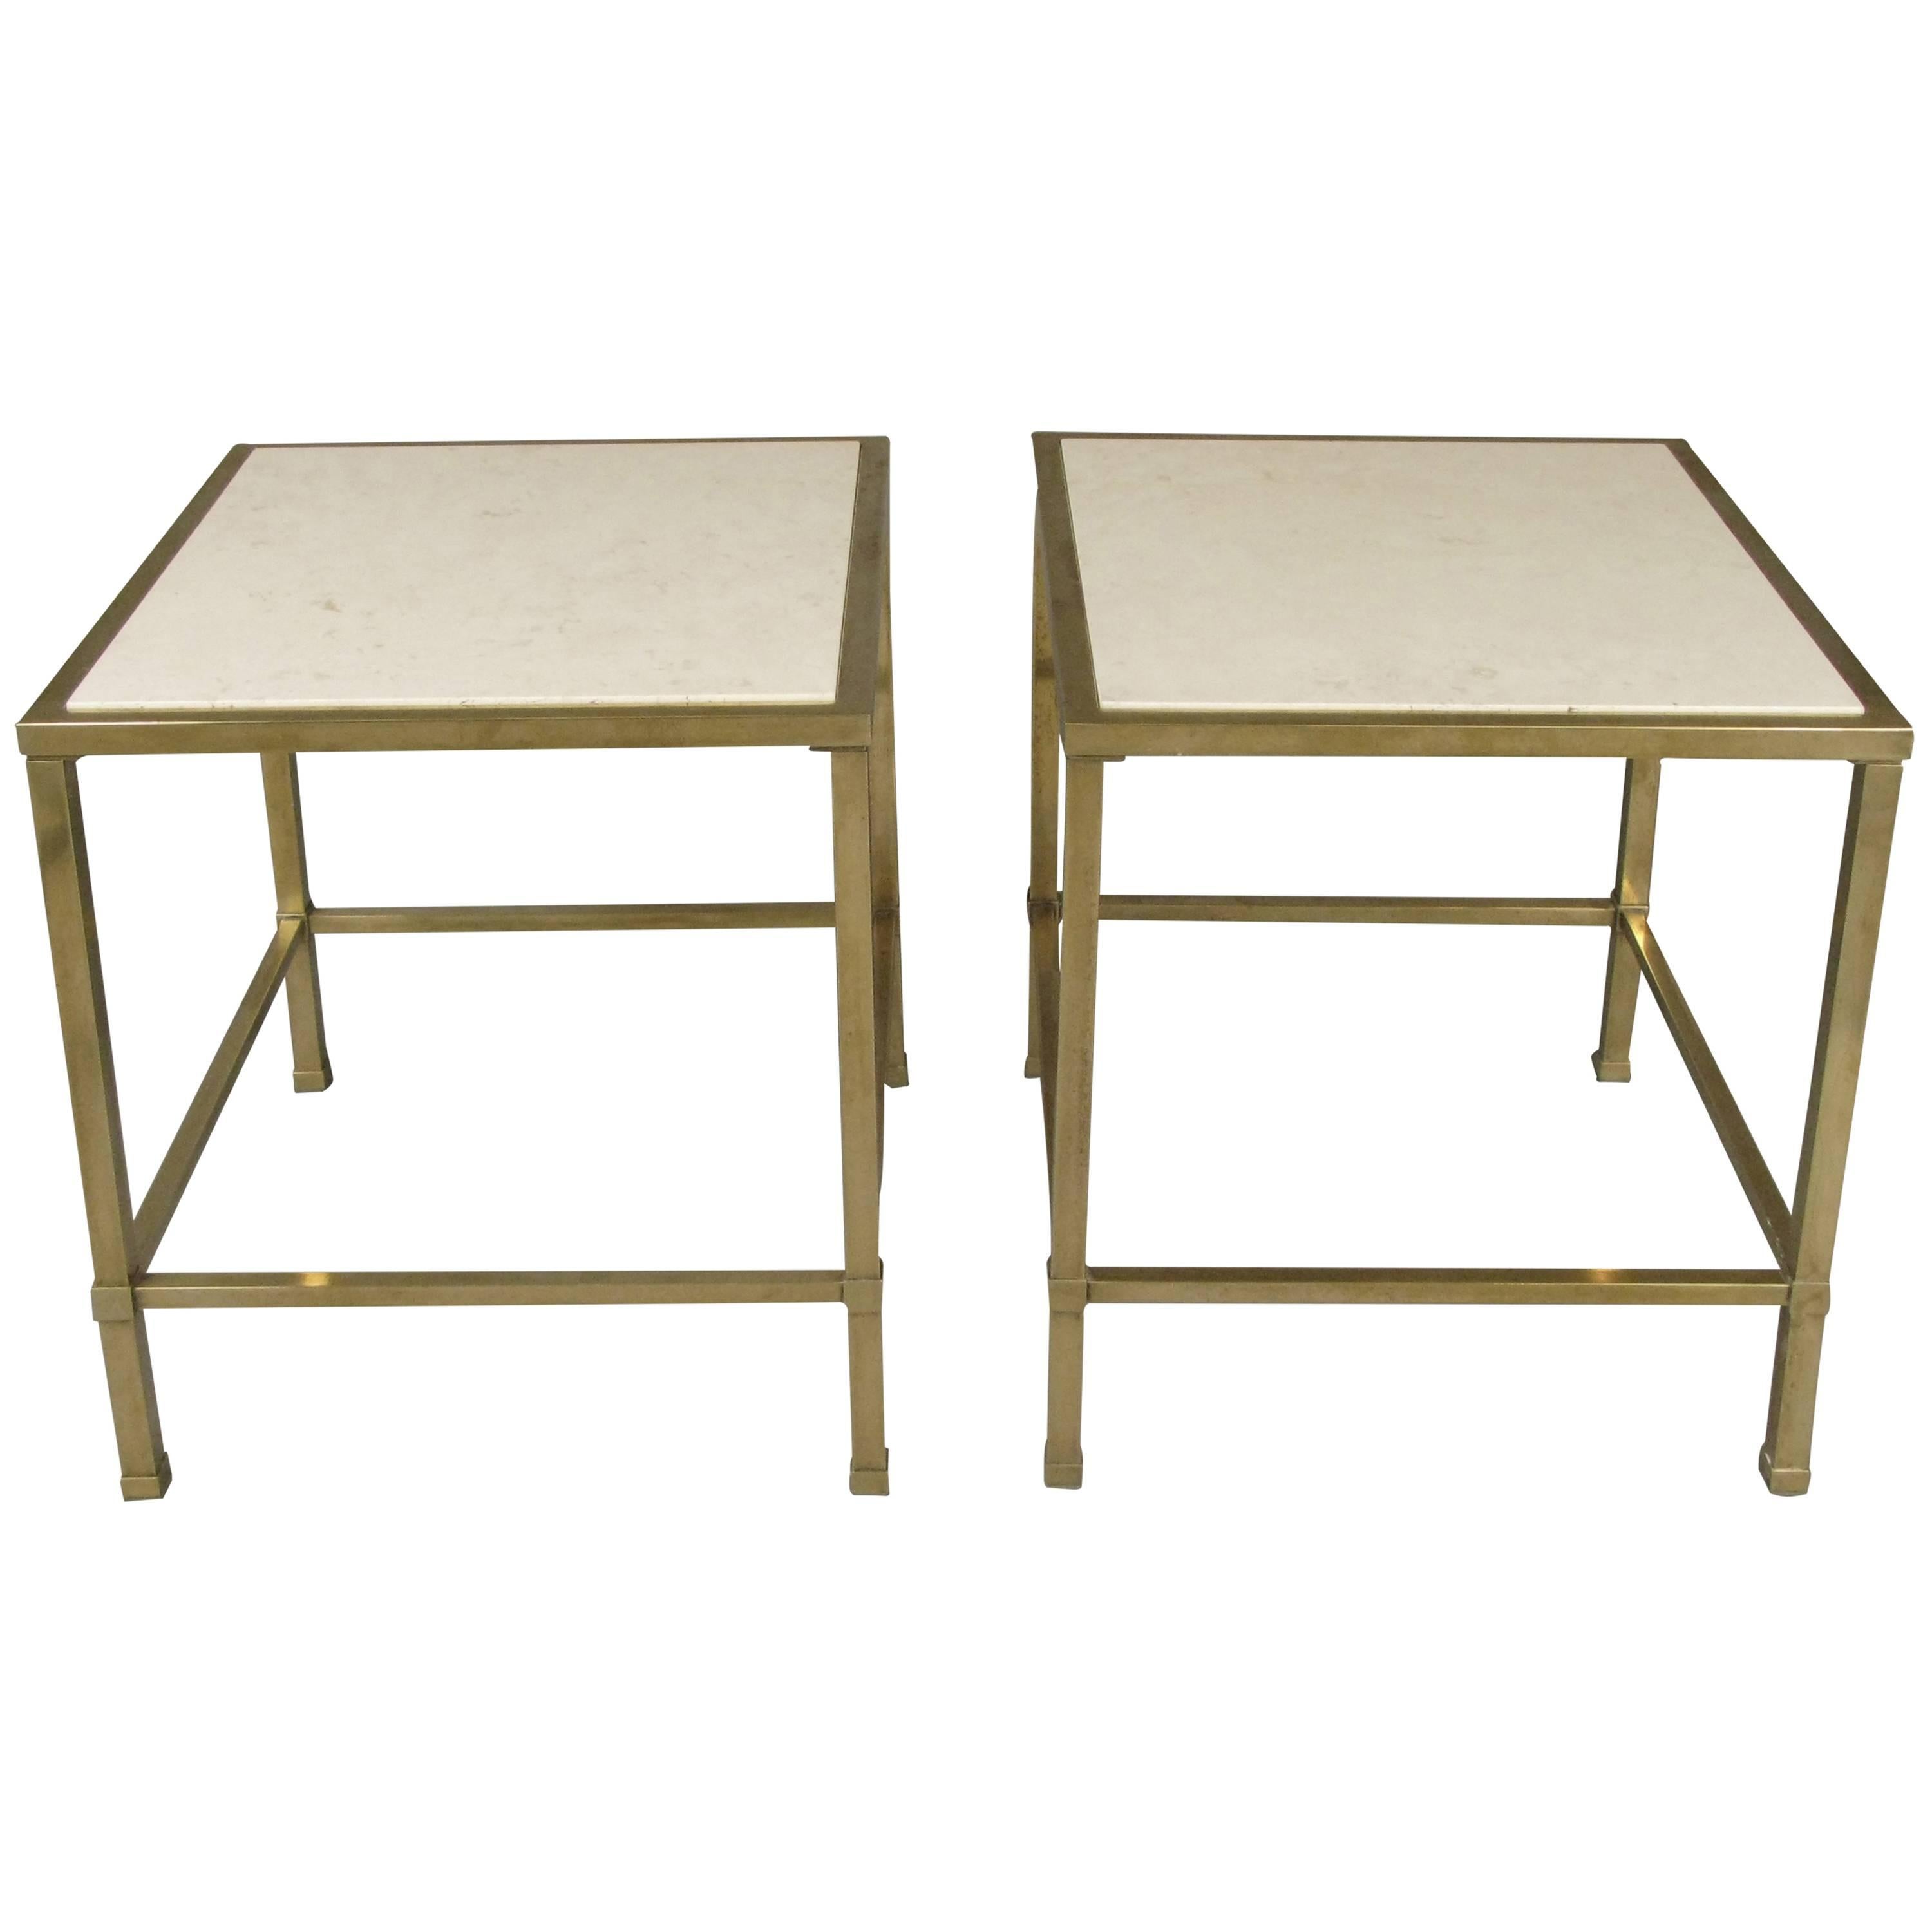 Pair of Vintage 1950s Brass and Travertine Tables